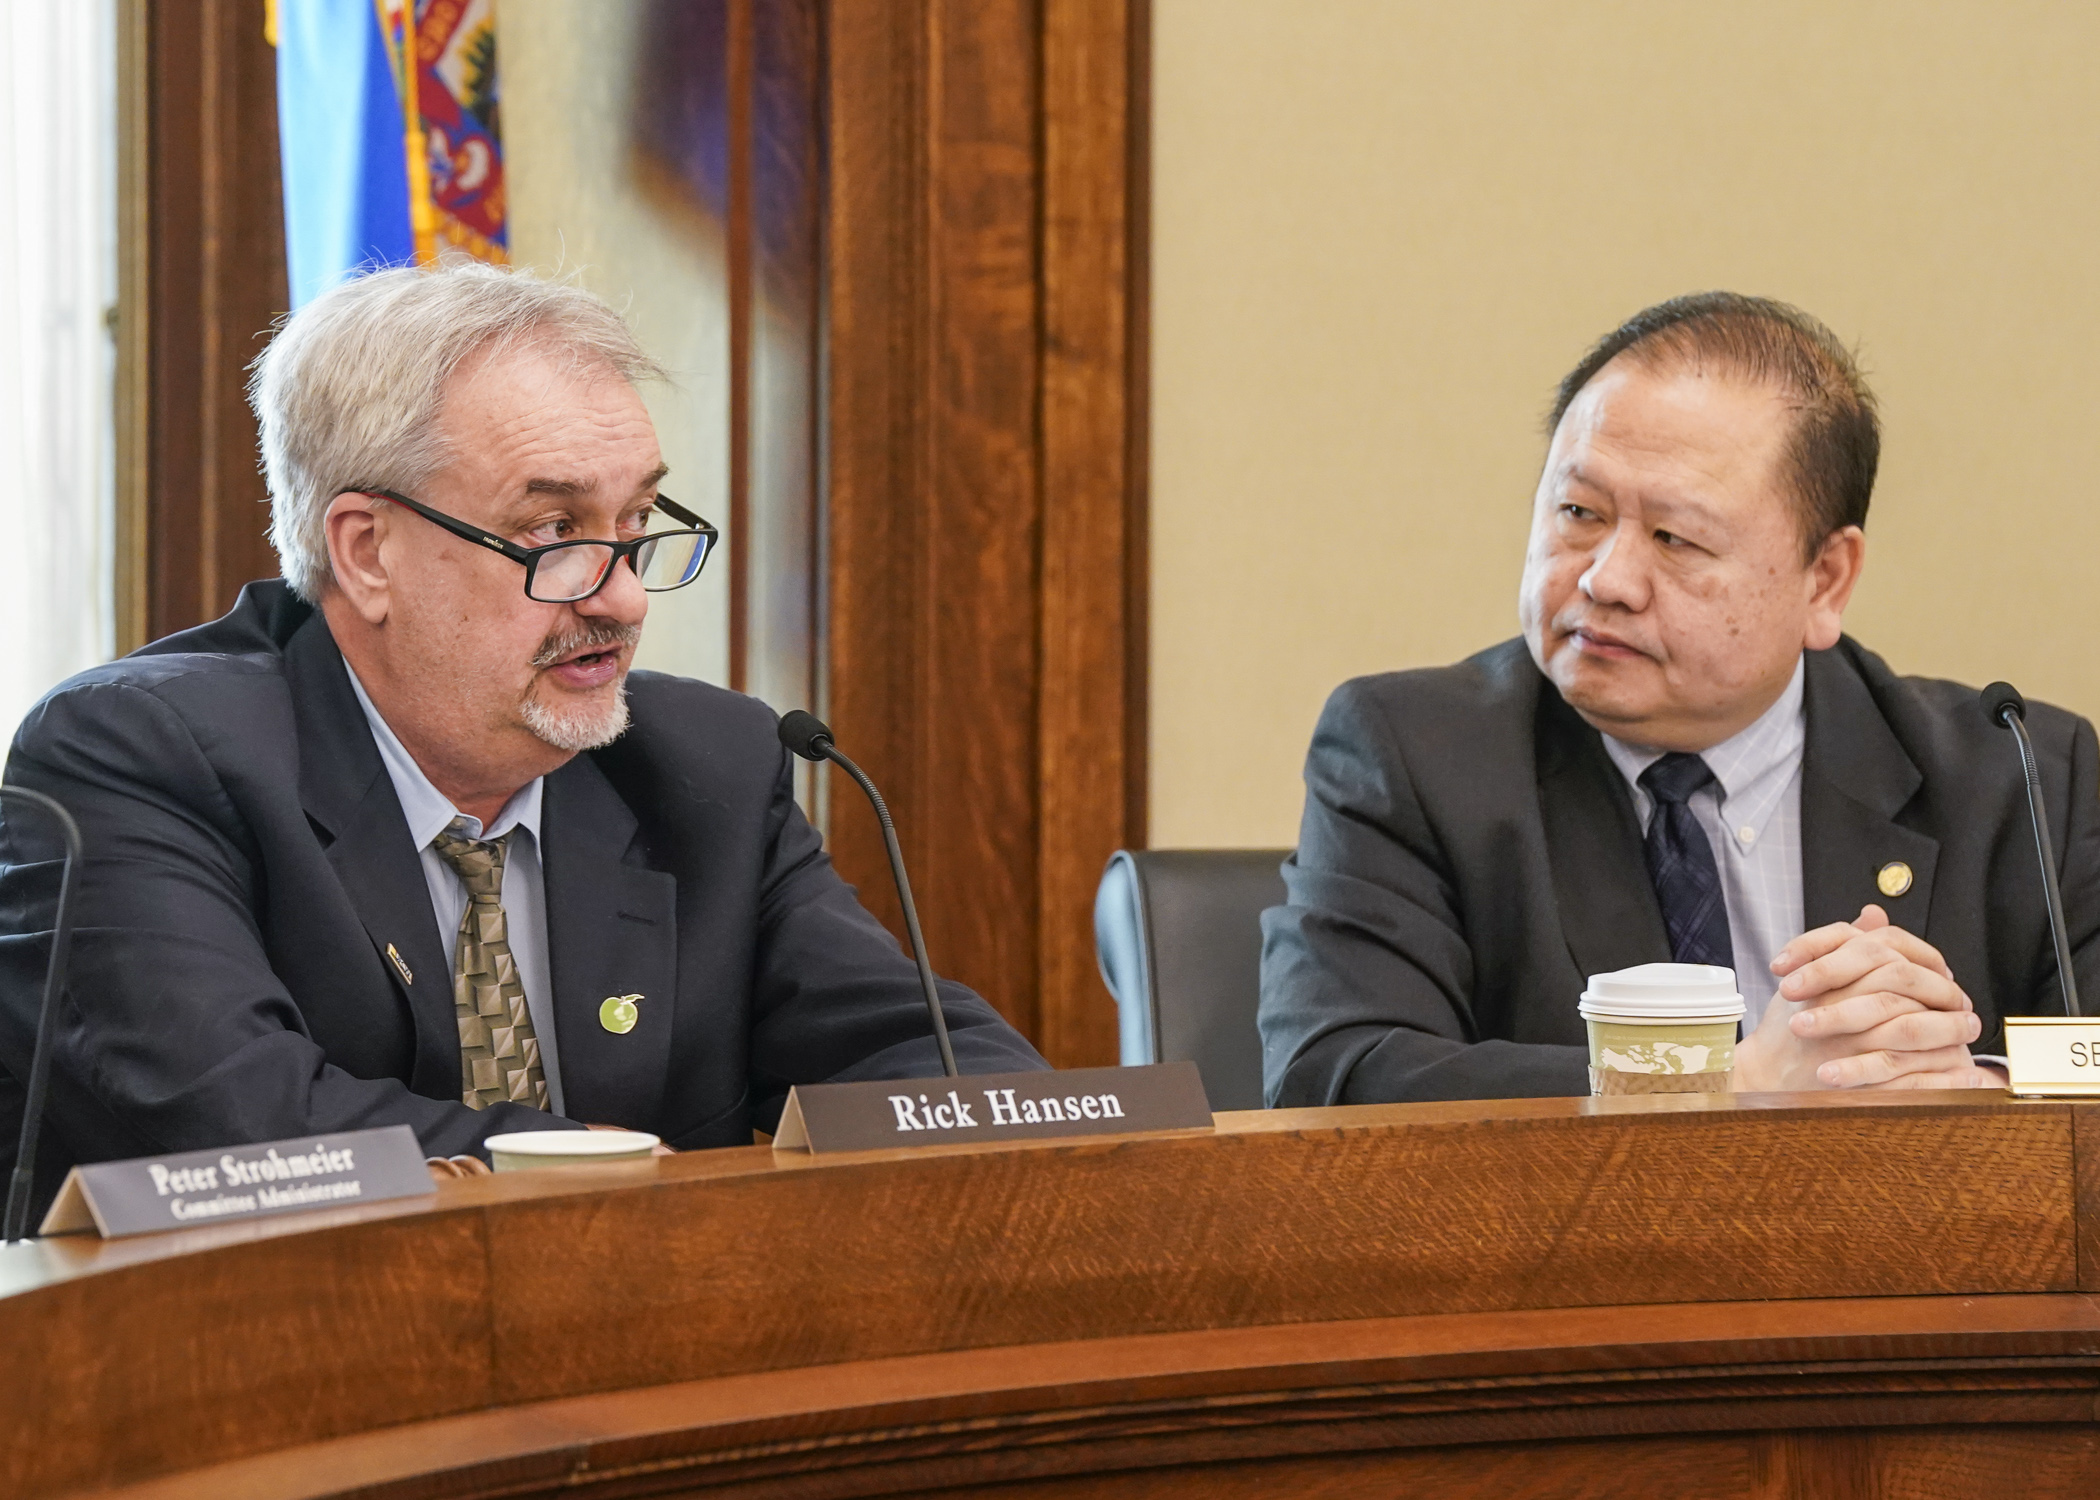 Sen. Foung Hawj, right, listens to Rep. Rick Hansen during a May 1 conference committee walkthrough of the House and Senate omnibus environment, natural resources, climate and energy bills. (Photo by Catherine Davis)